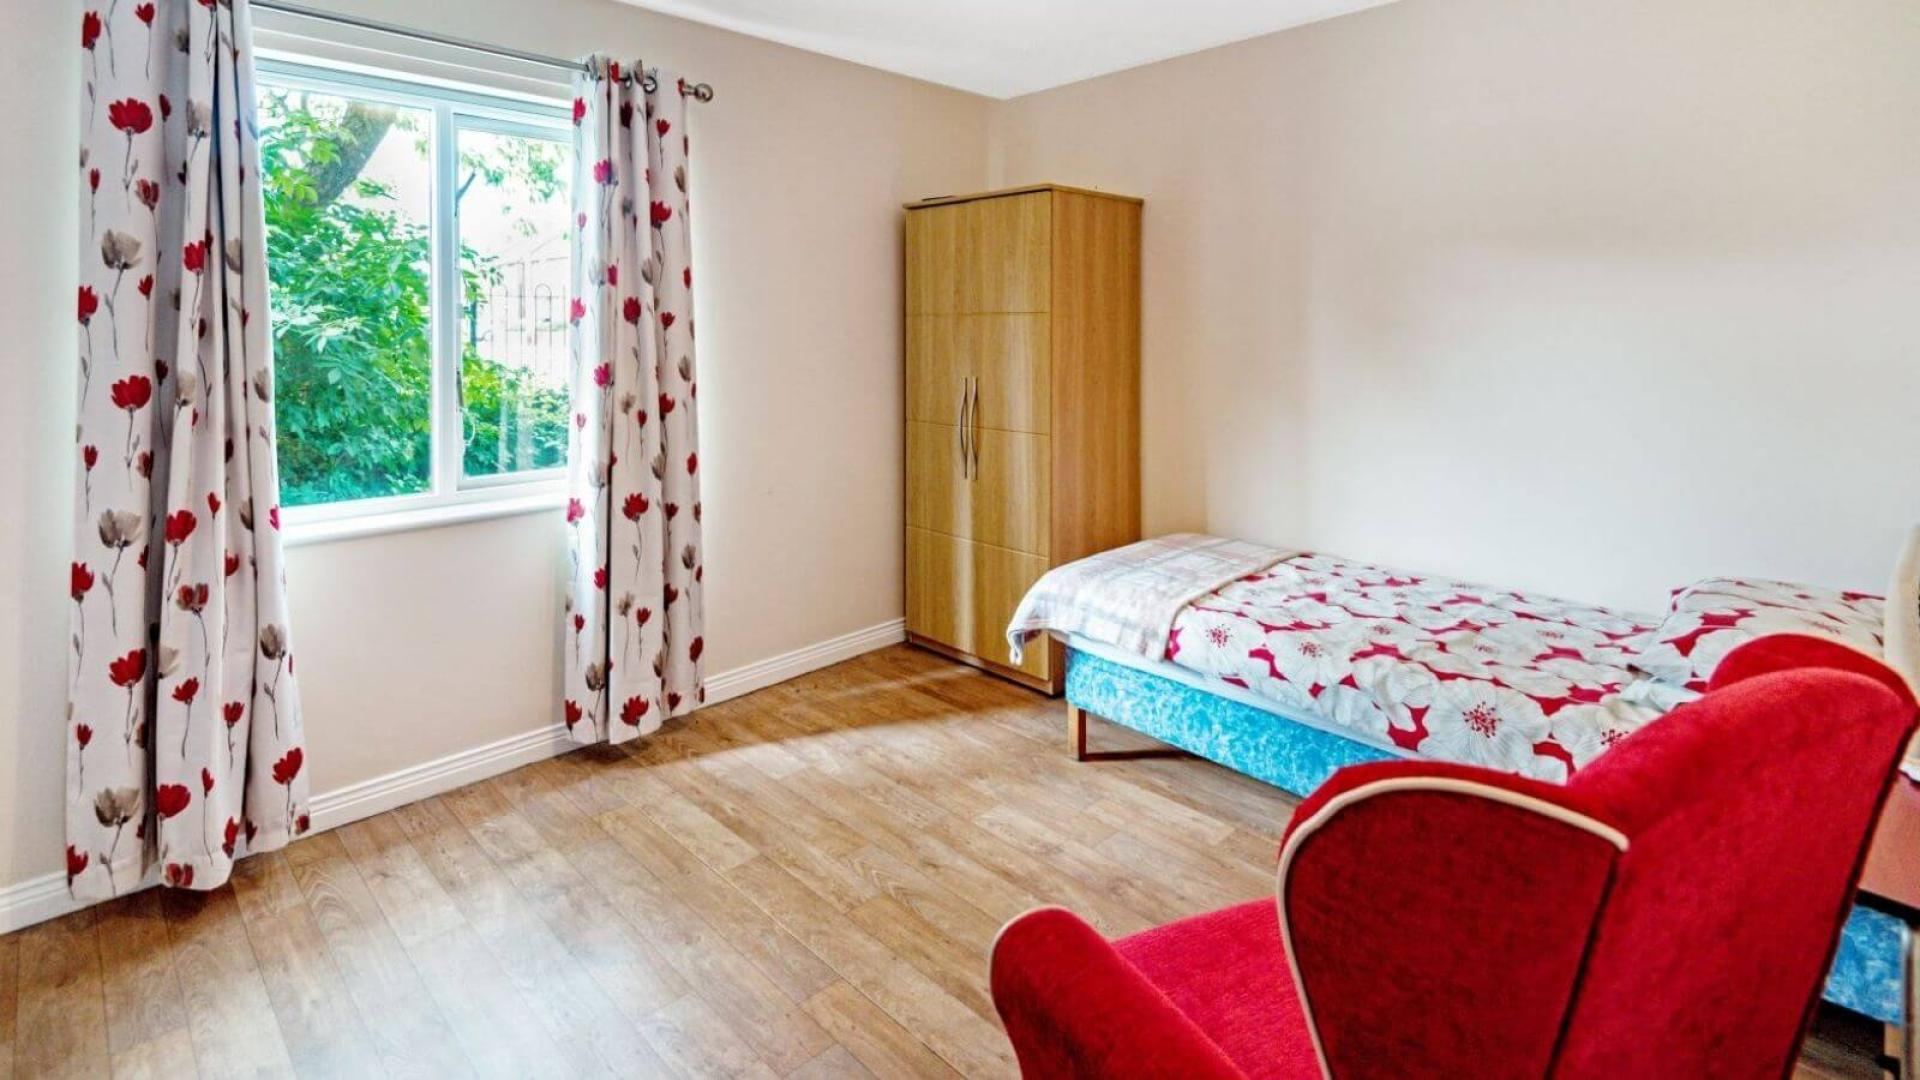 The bedrooms at Archers Park Dementia Care Home in Sunderland 